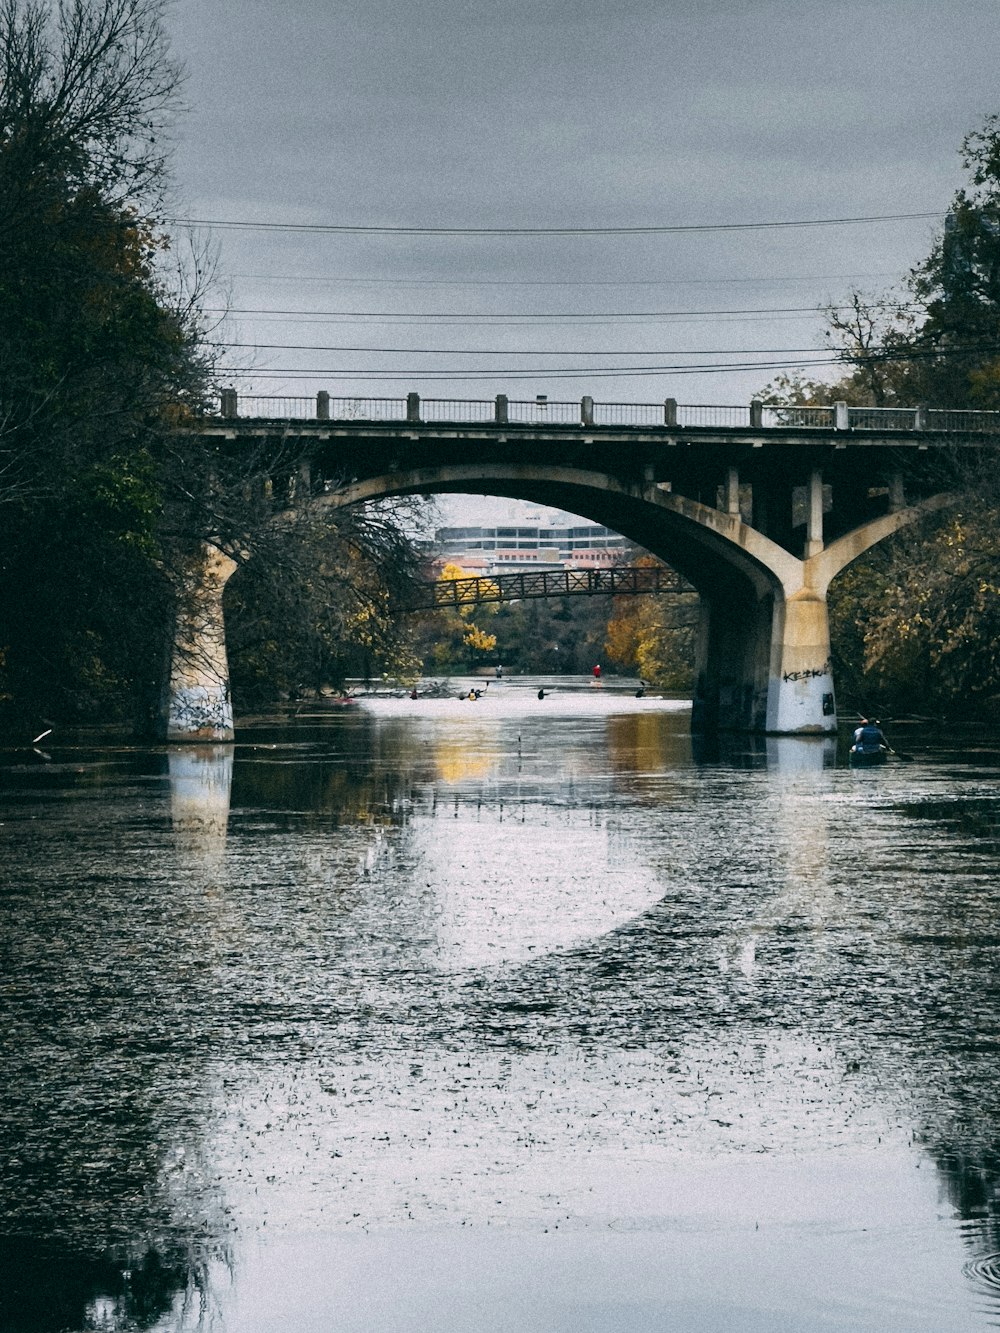 a bridge over a body of water with a boat on it